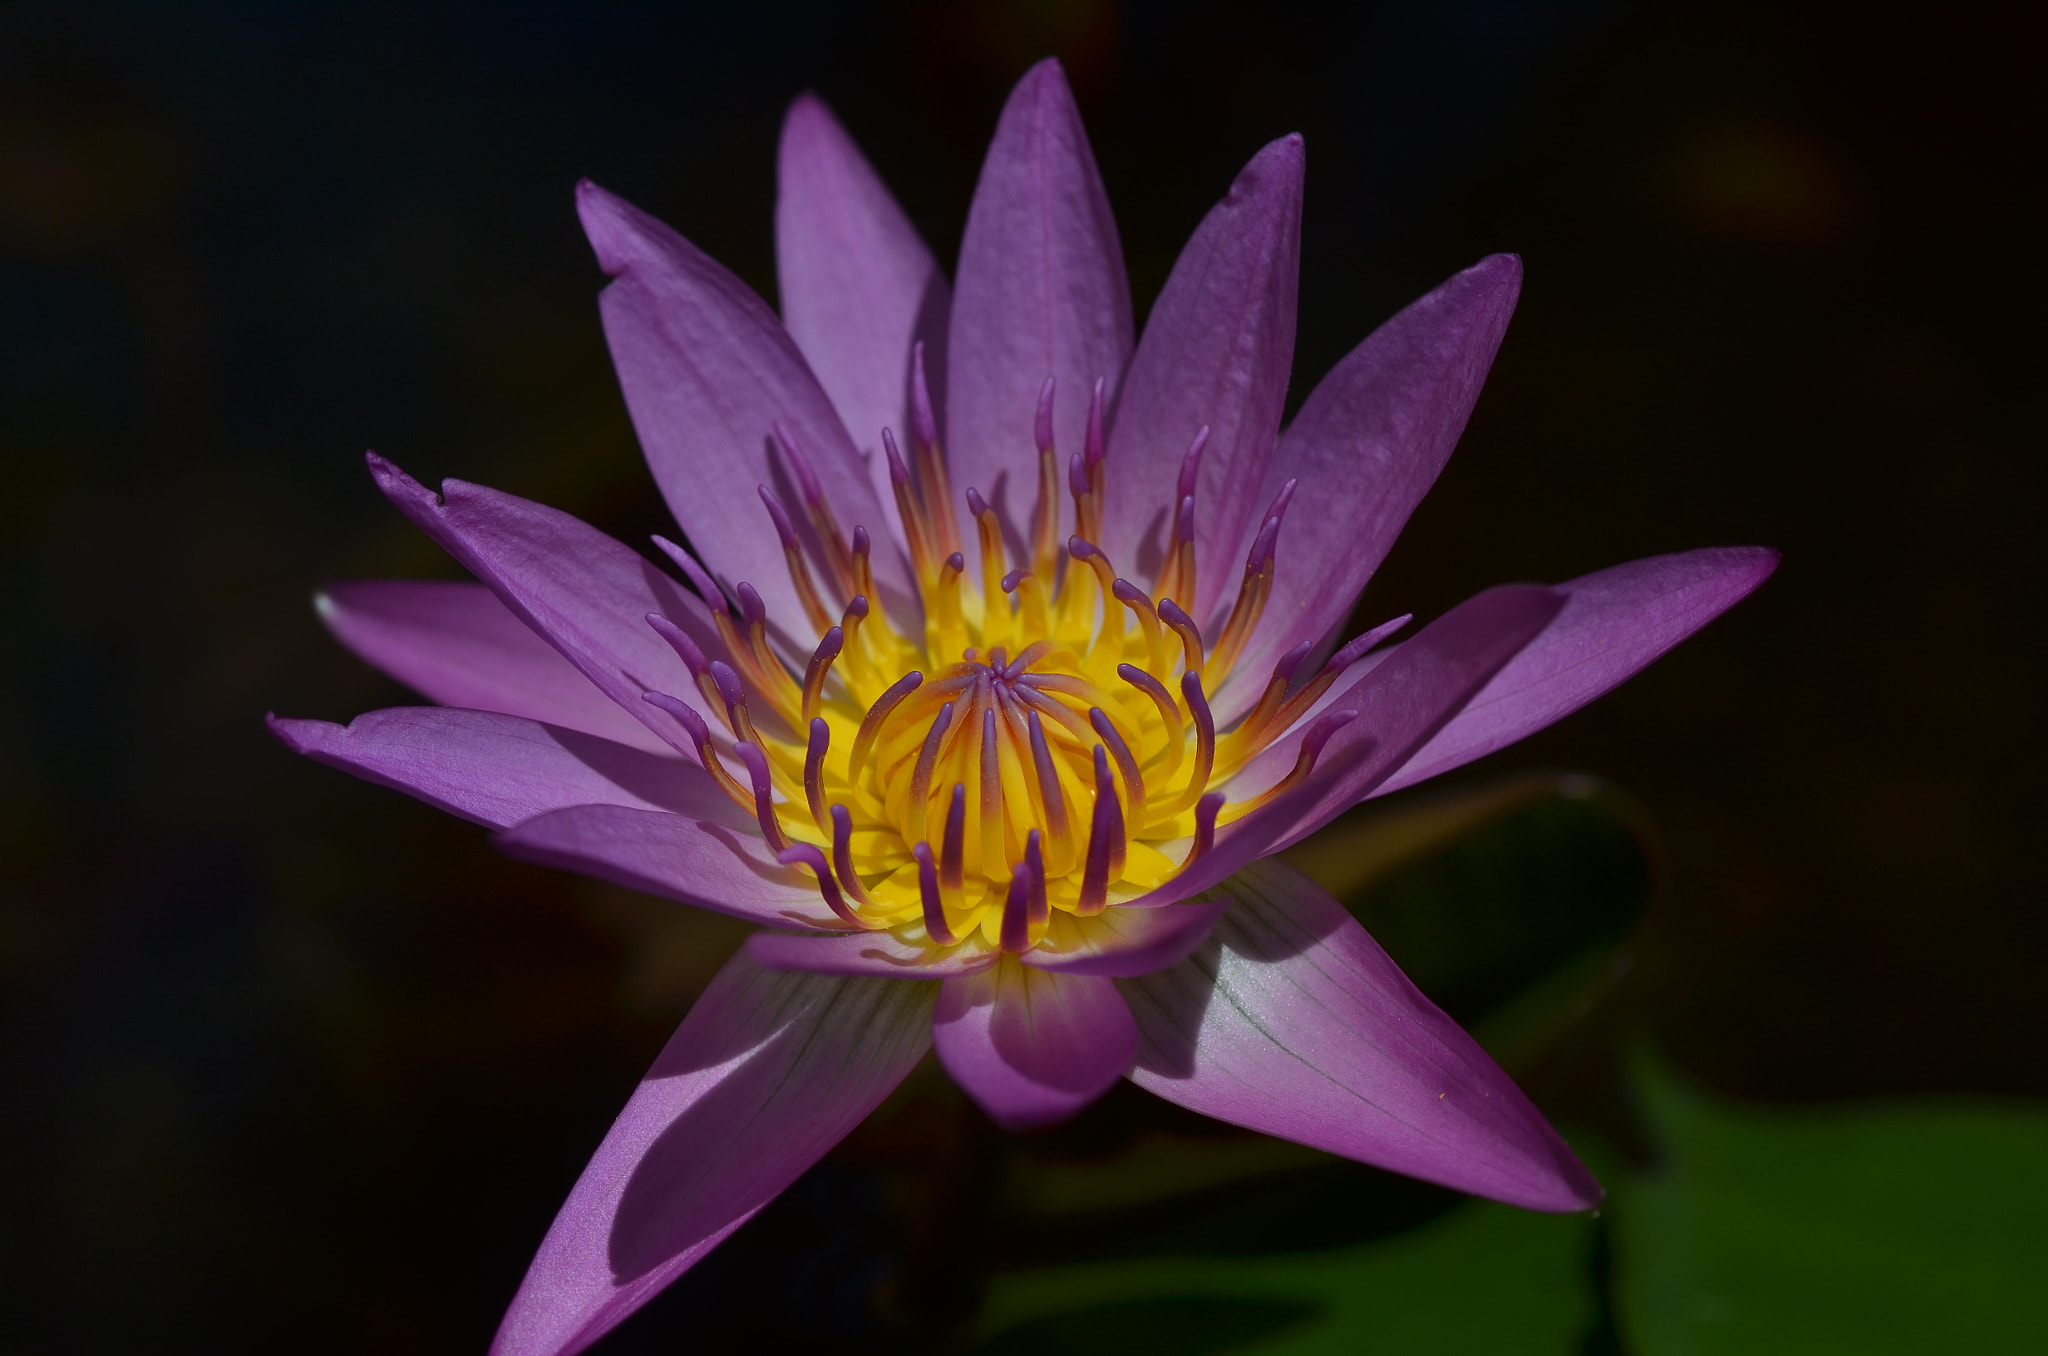 Nikon D7000 + Nikon AF-S Micro-Nikkor 105mm F2.8G IF-ED VR sample photo. More of waterlily photography